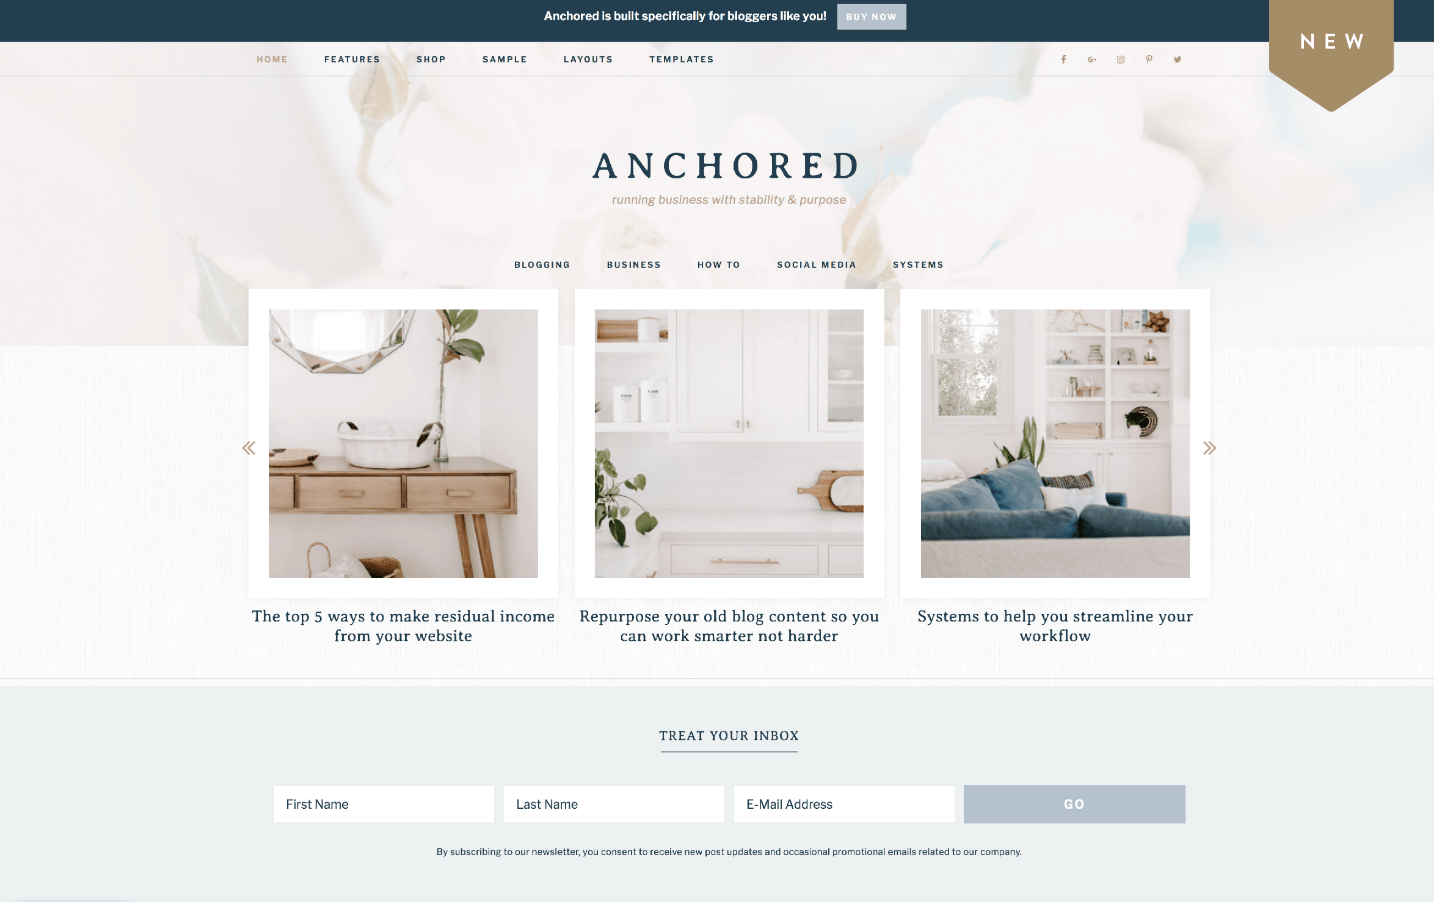 Restored 316 Anchored Theme | Proverbs 31 Business Woman | Restored 316 Showcase | Restored 316 Examples